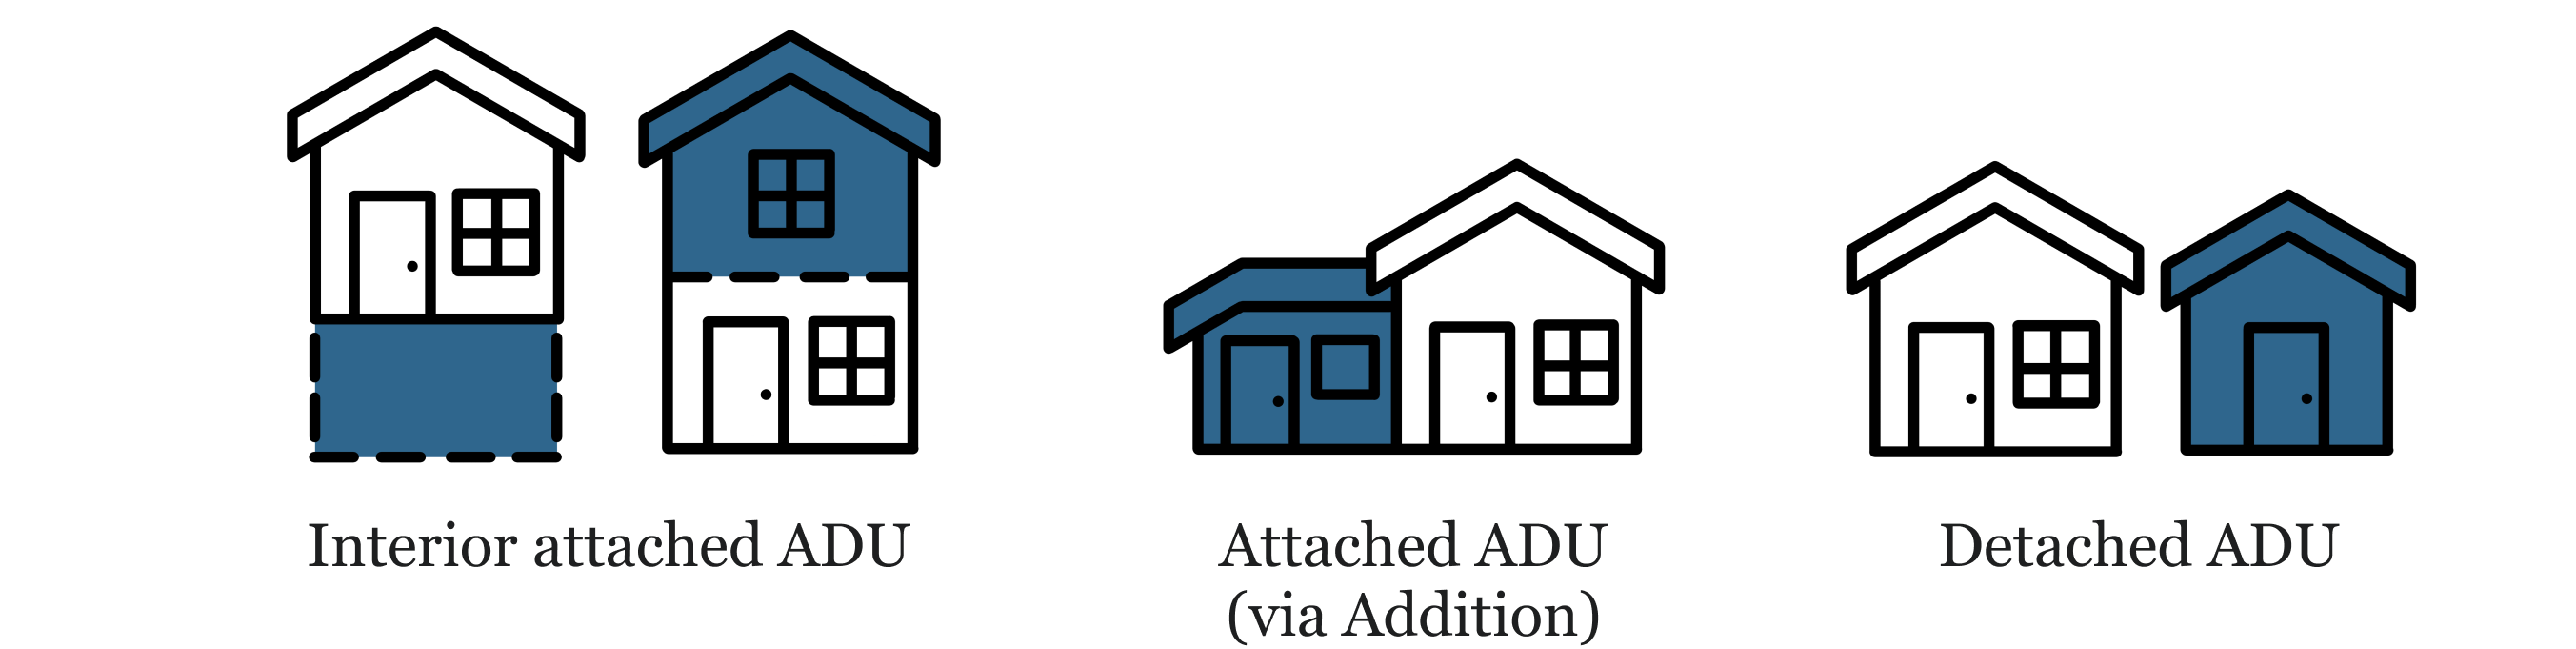 a graphic showcasing the types of ADUs: interior attached (basement/garage), attached, and detached.